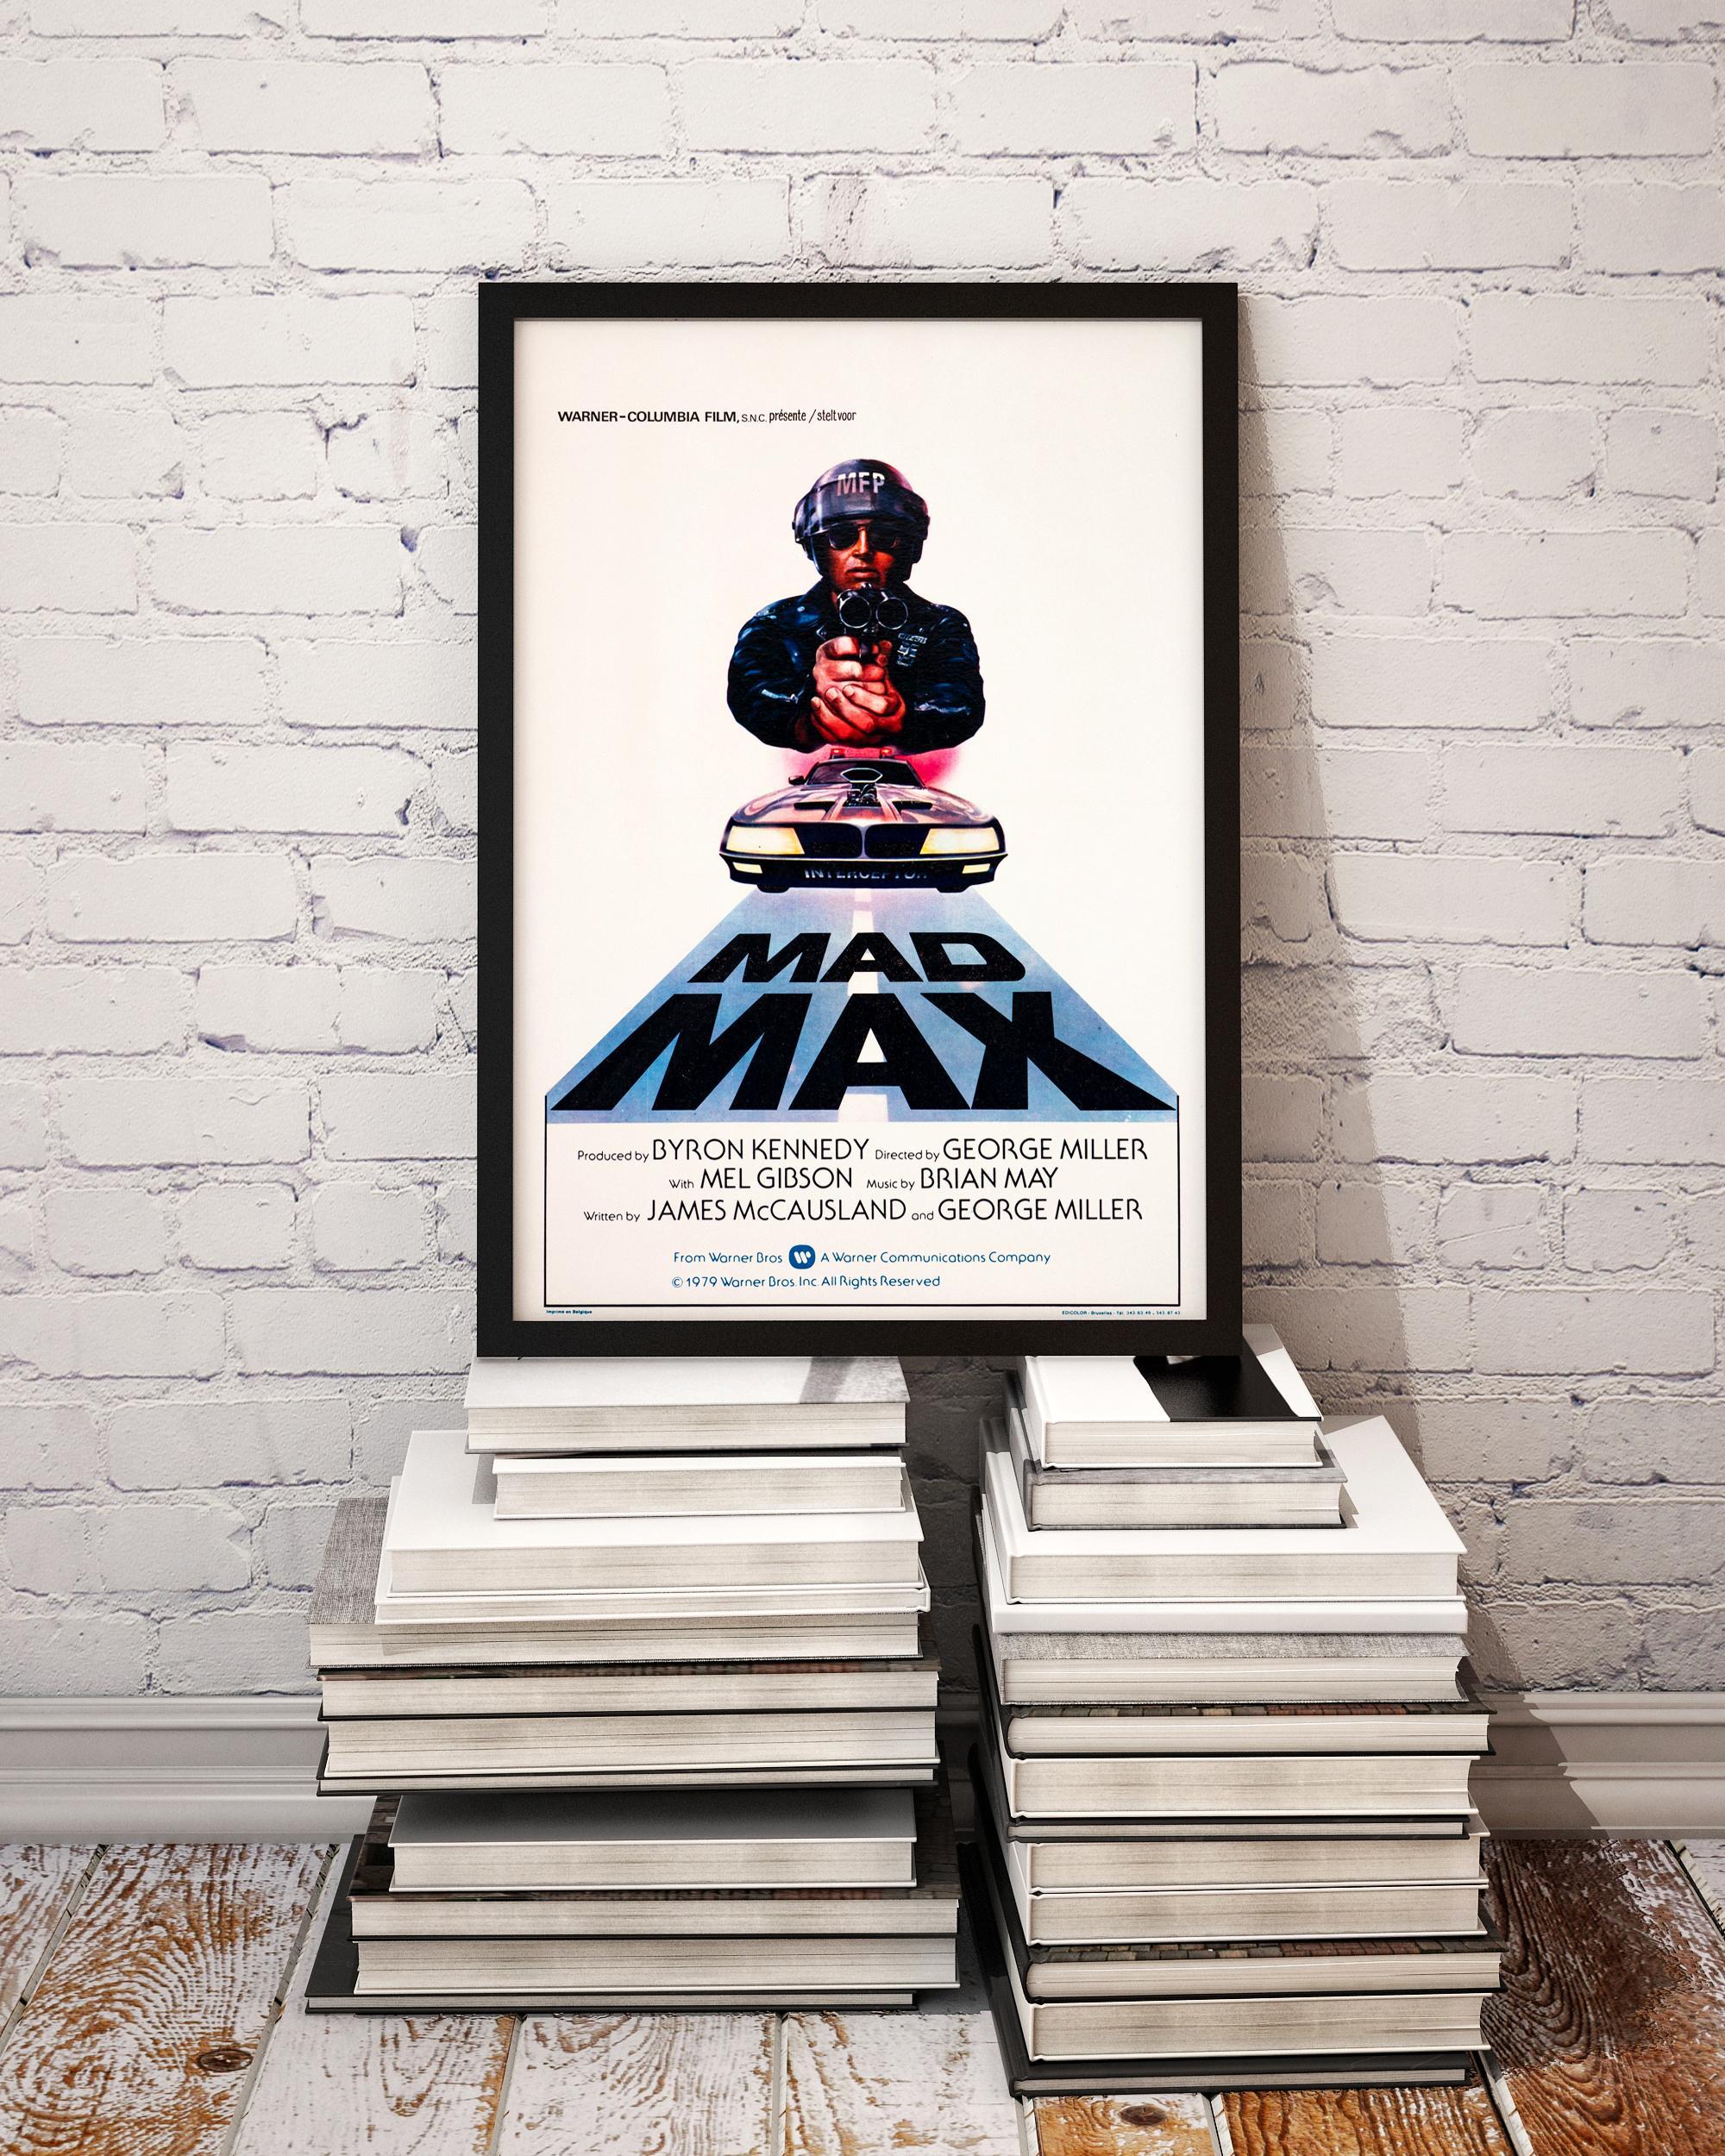 'Mad Max' Original Vintage Movie Poster by Tom Beauvais, Belgian, 1982 For Sale 1